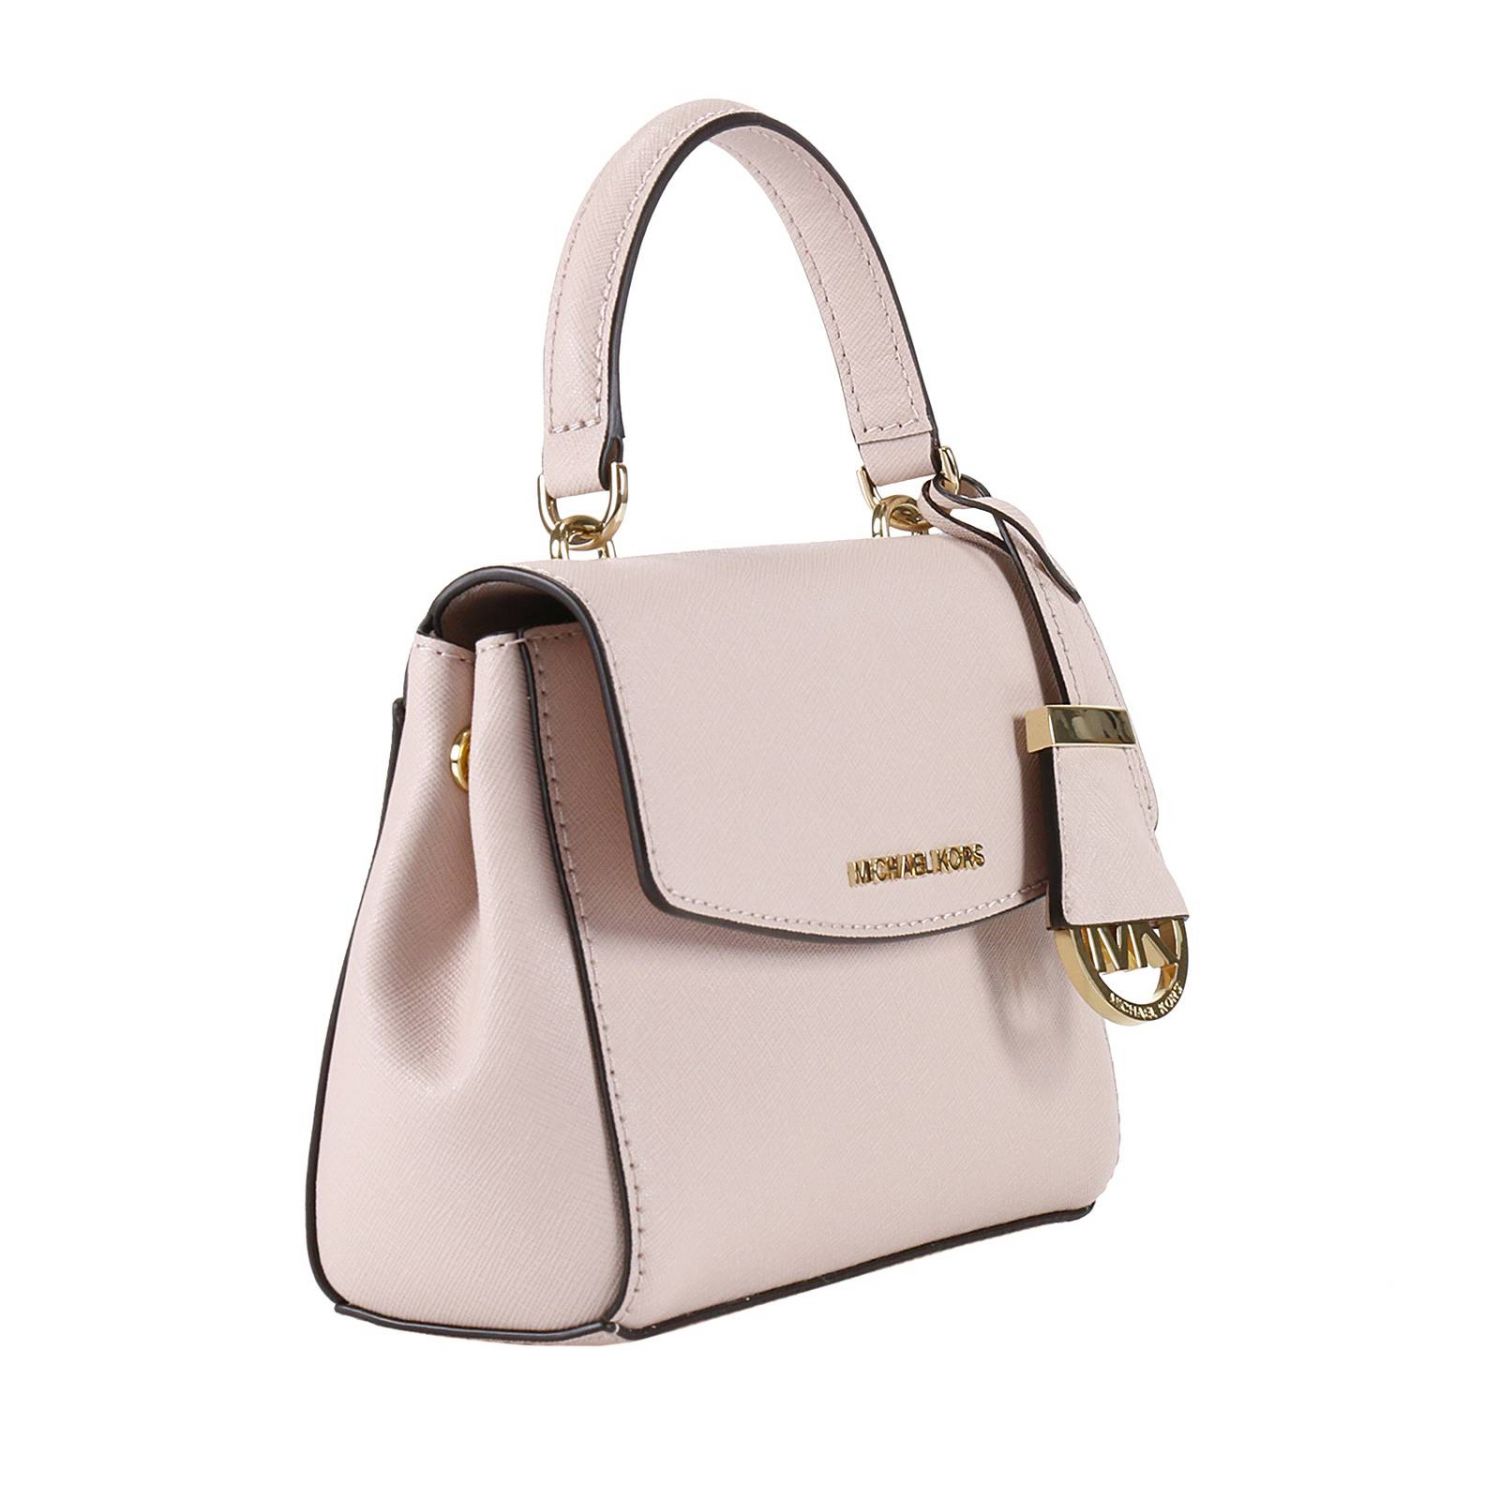 Michael Michael Kors Outlet: Ava small bag in saffiano leather with ...